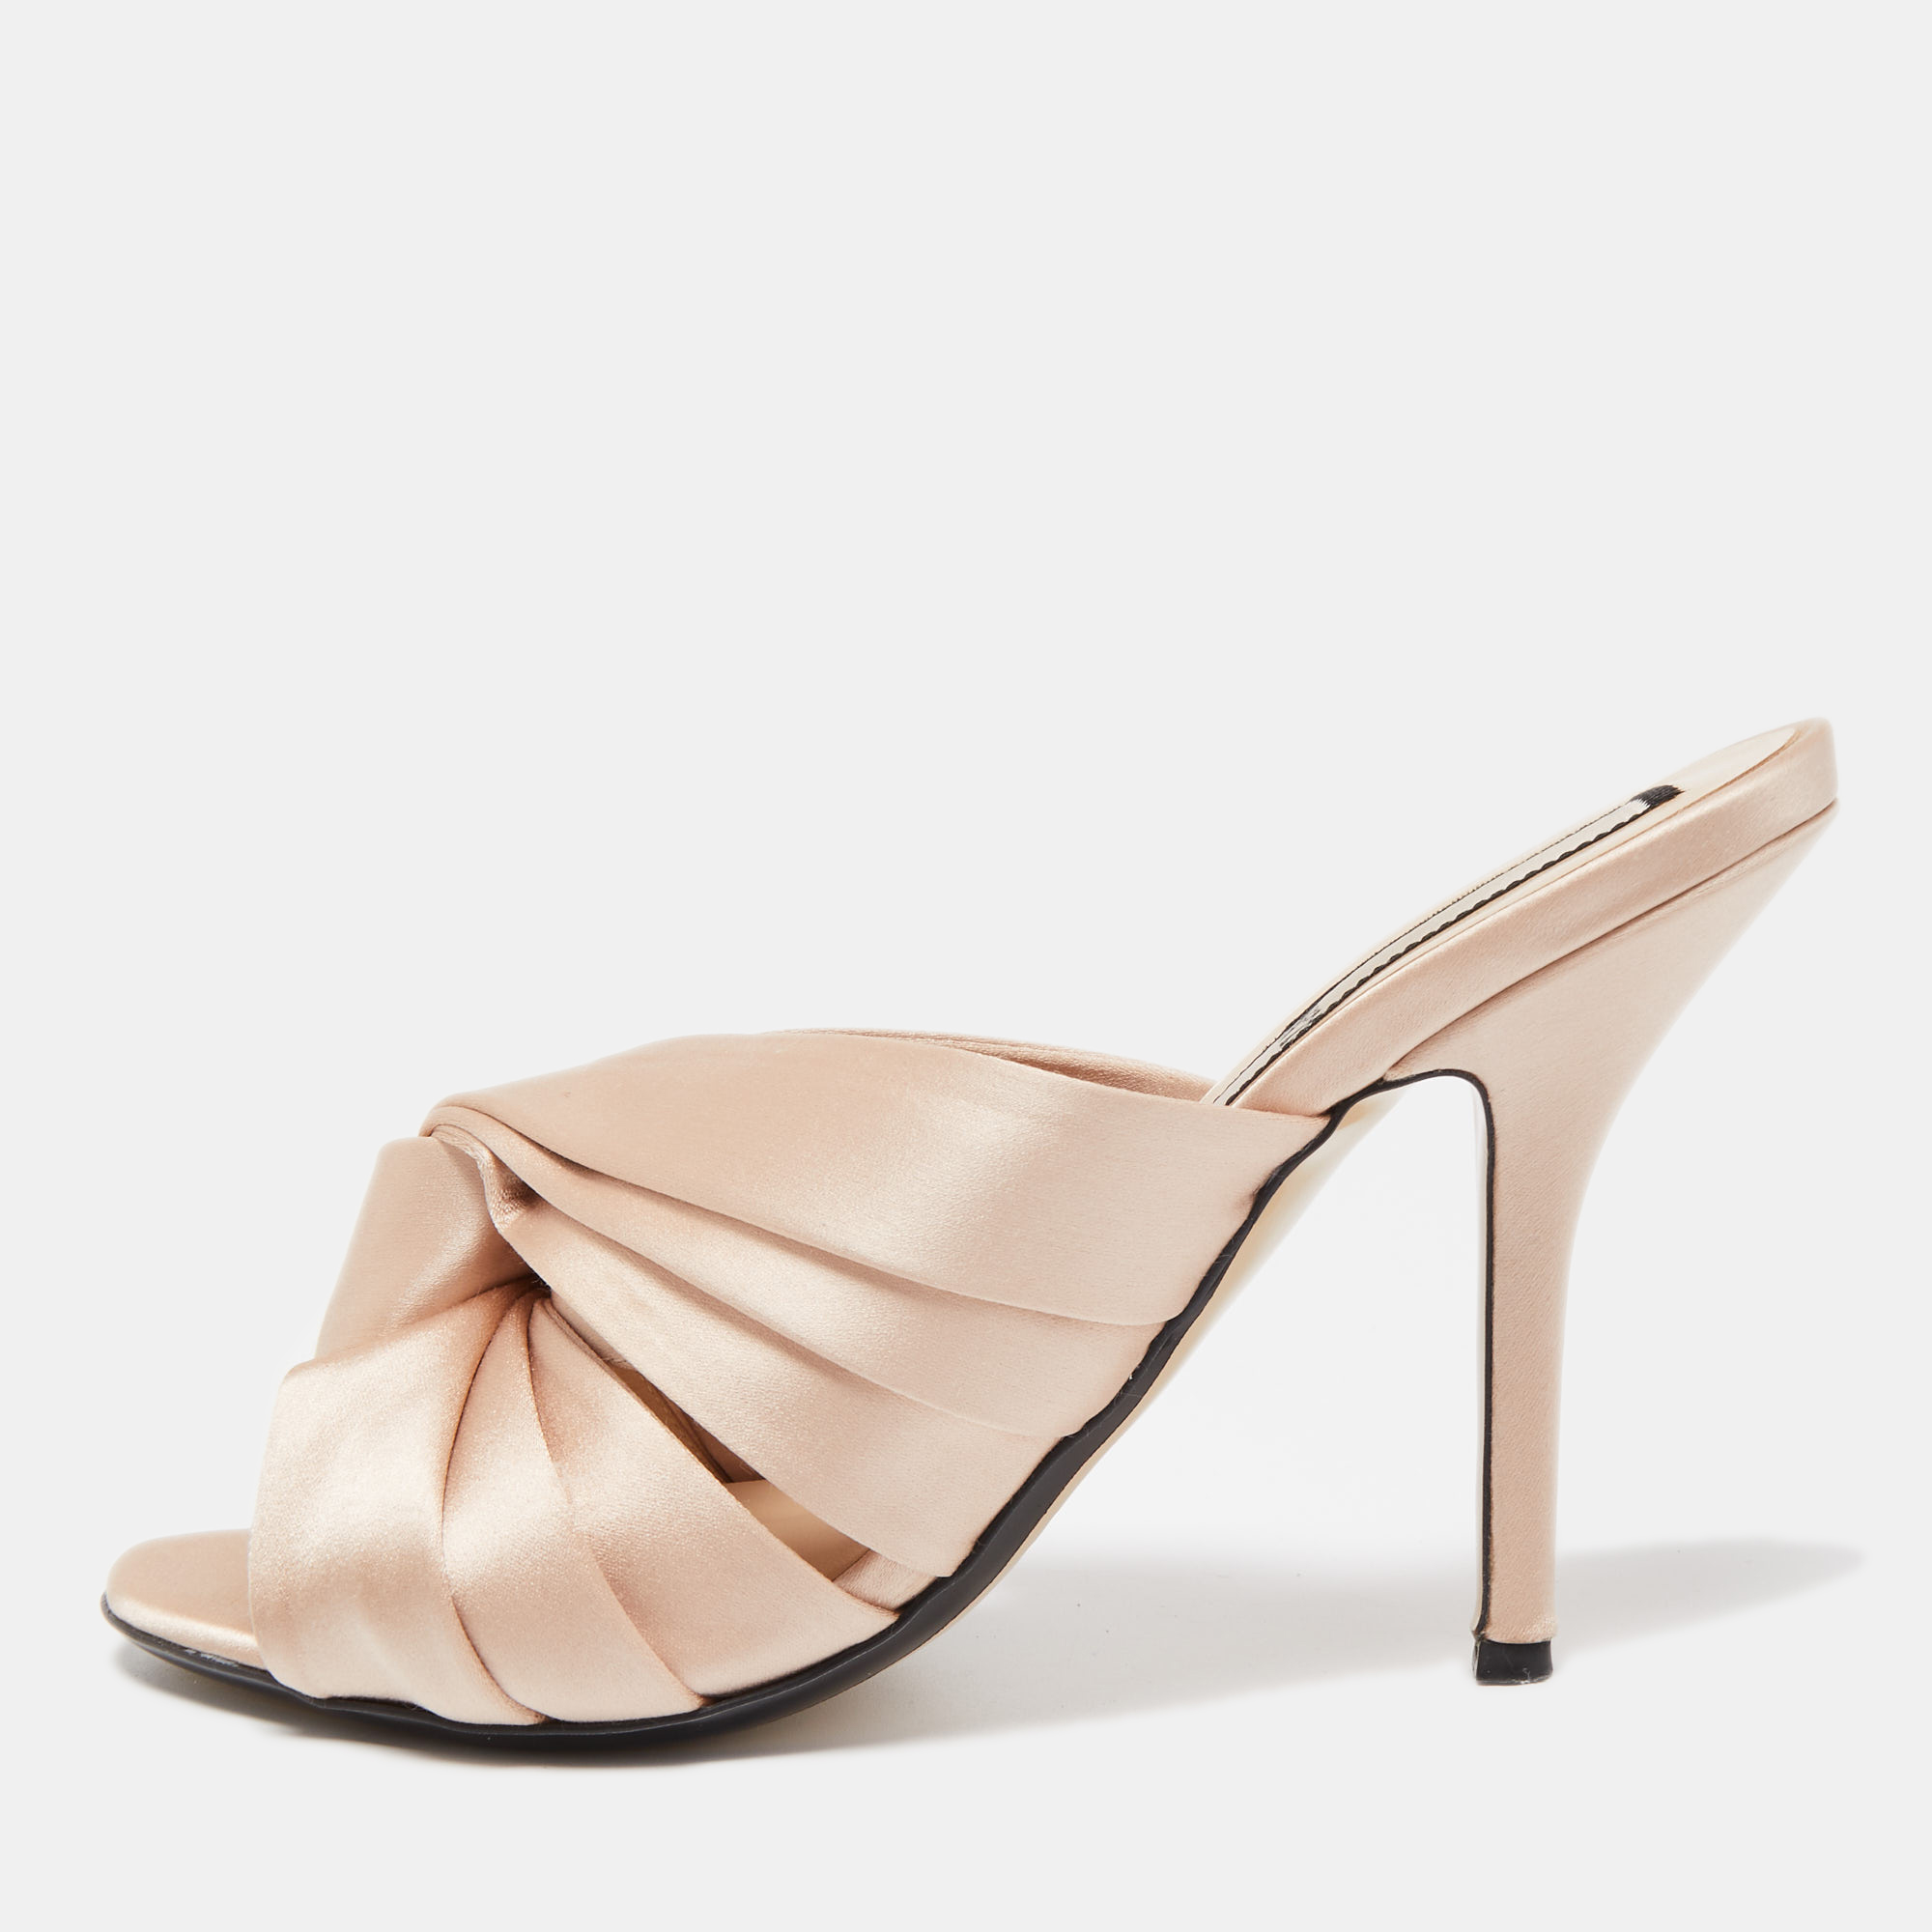 N21 beige satin ronny pleated mules size 38